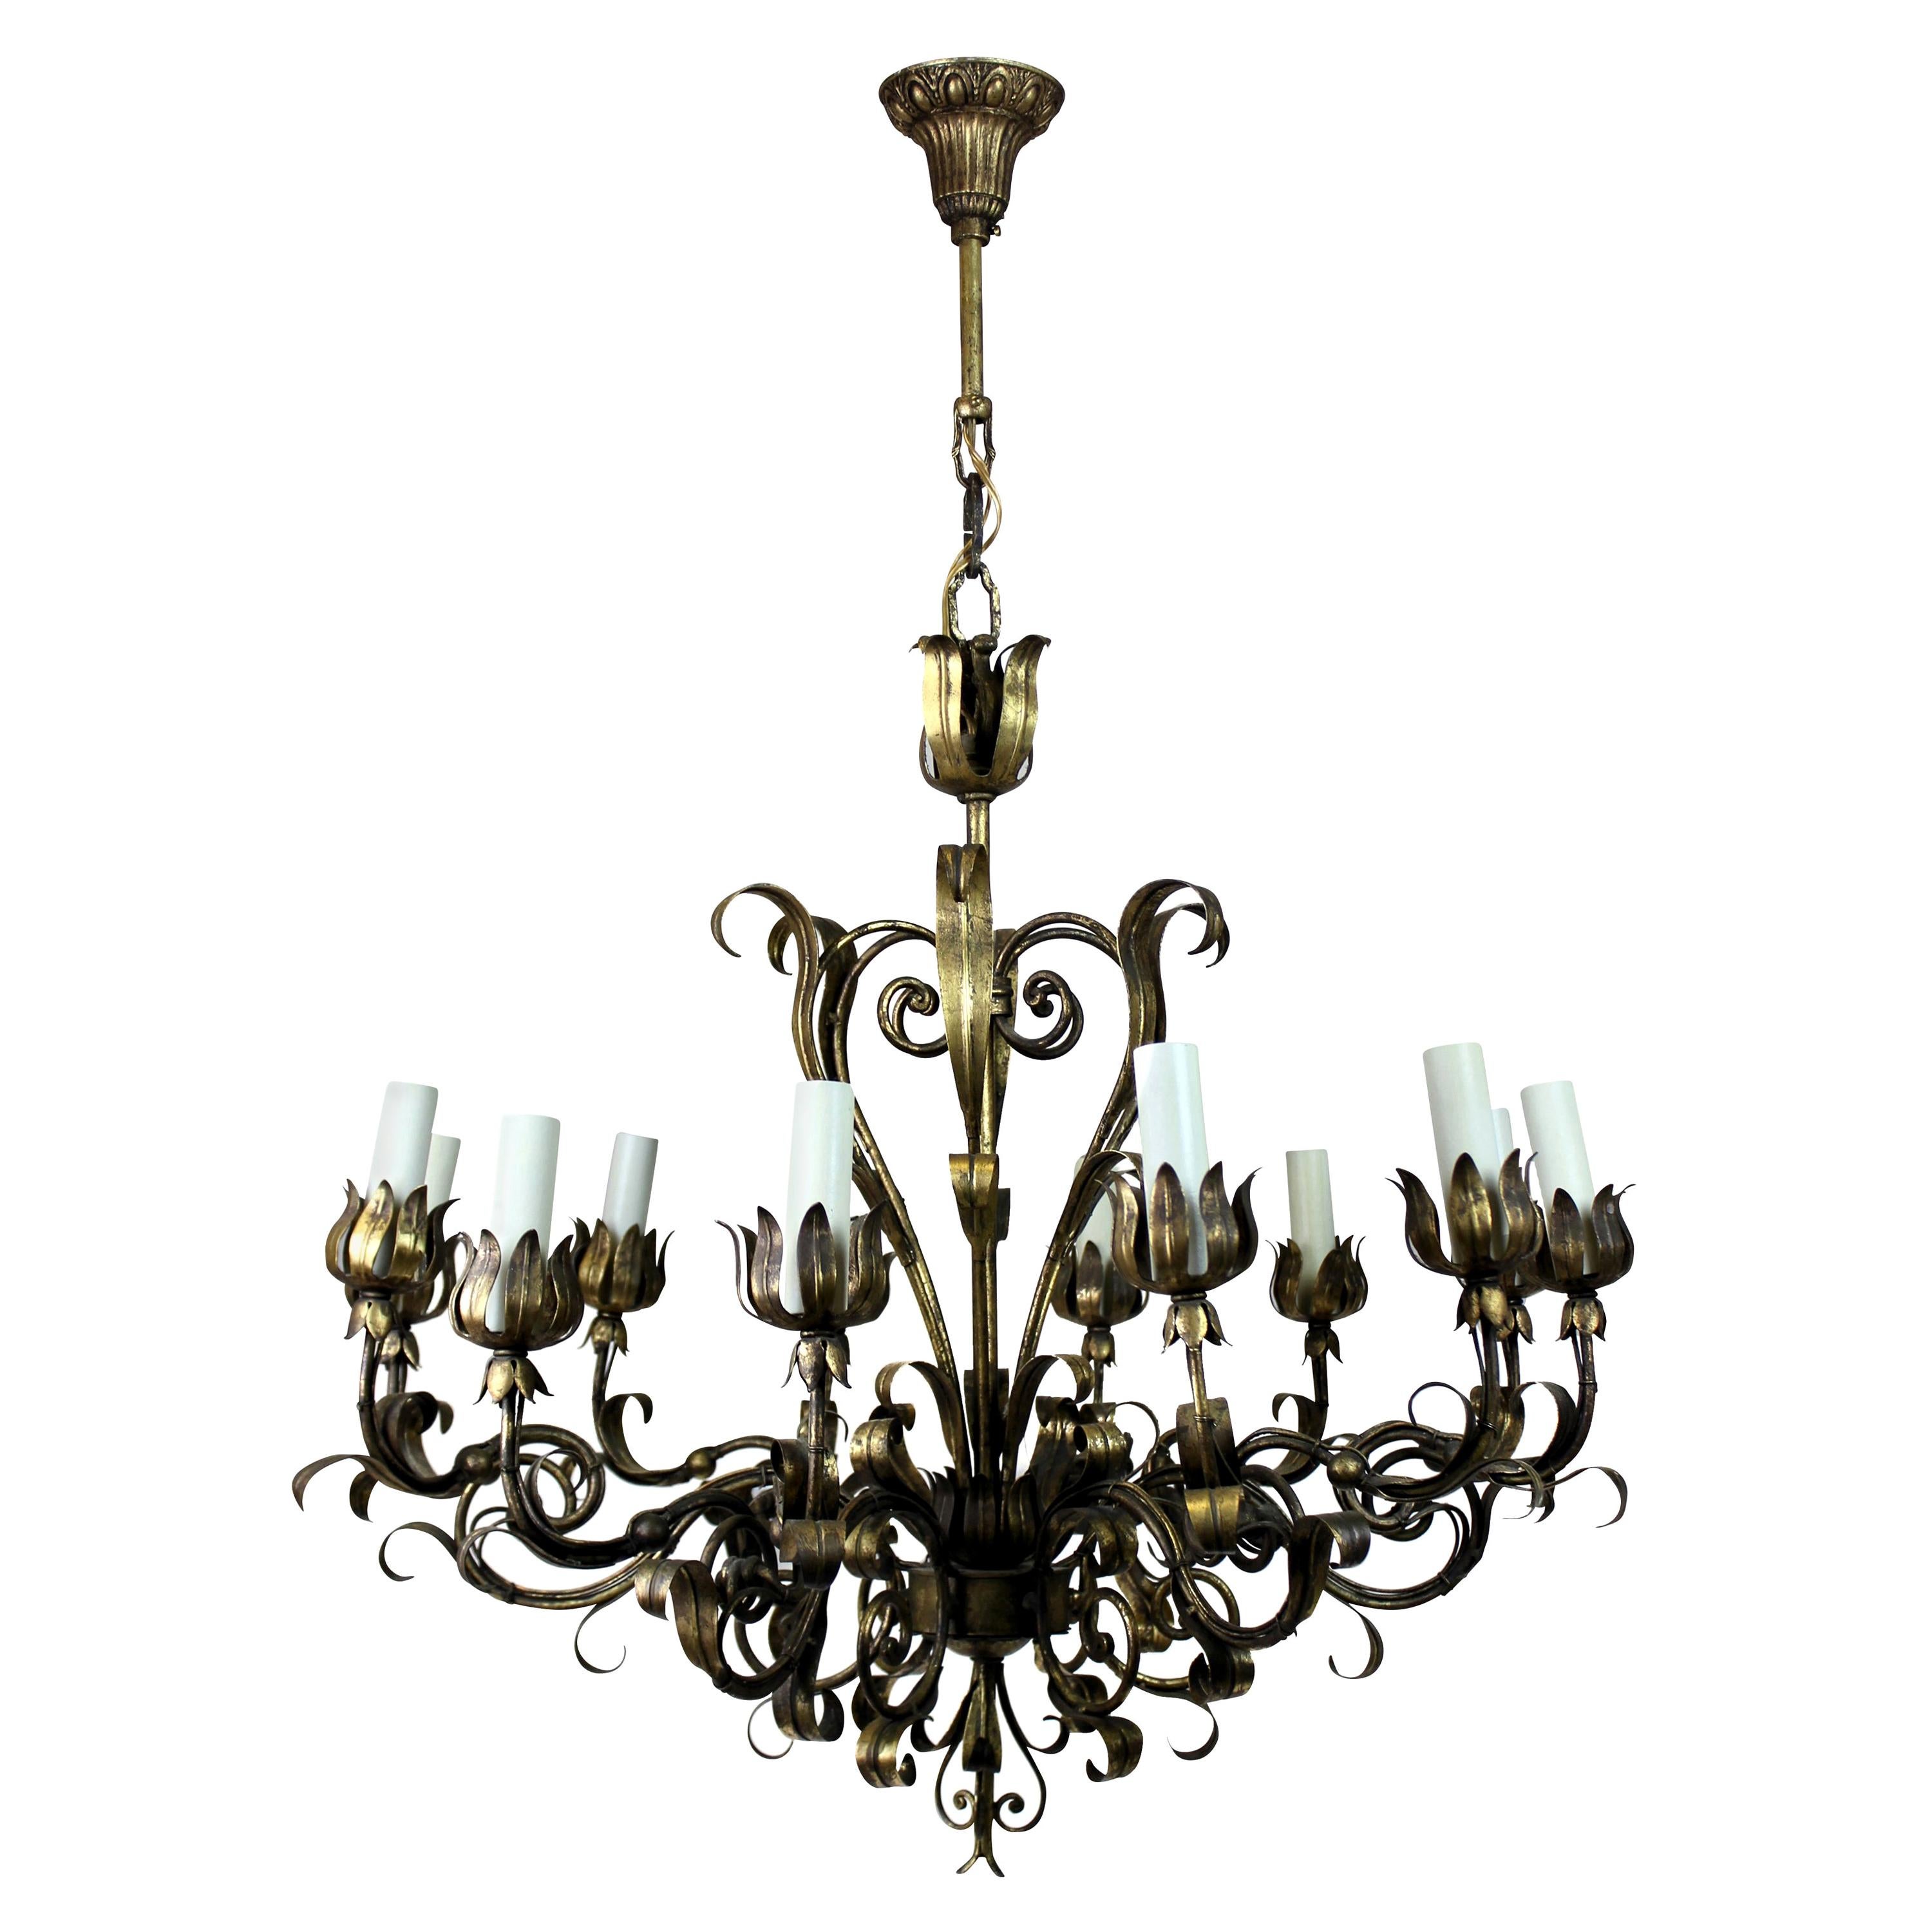 Gilded Wrought Iron Chandelier